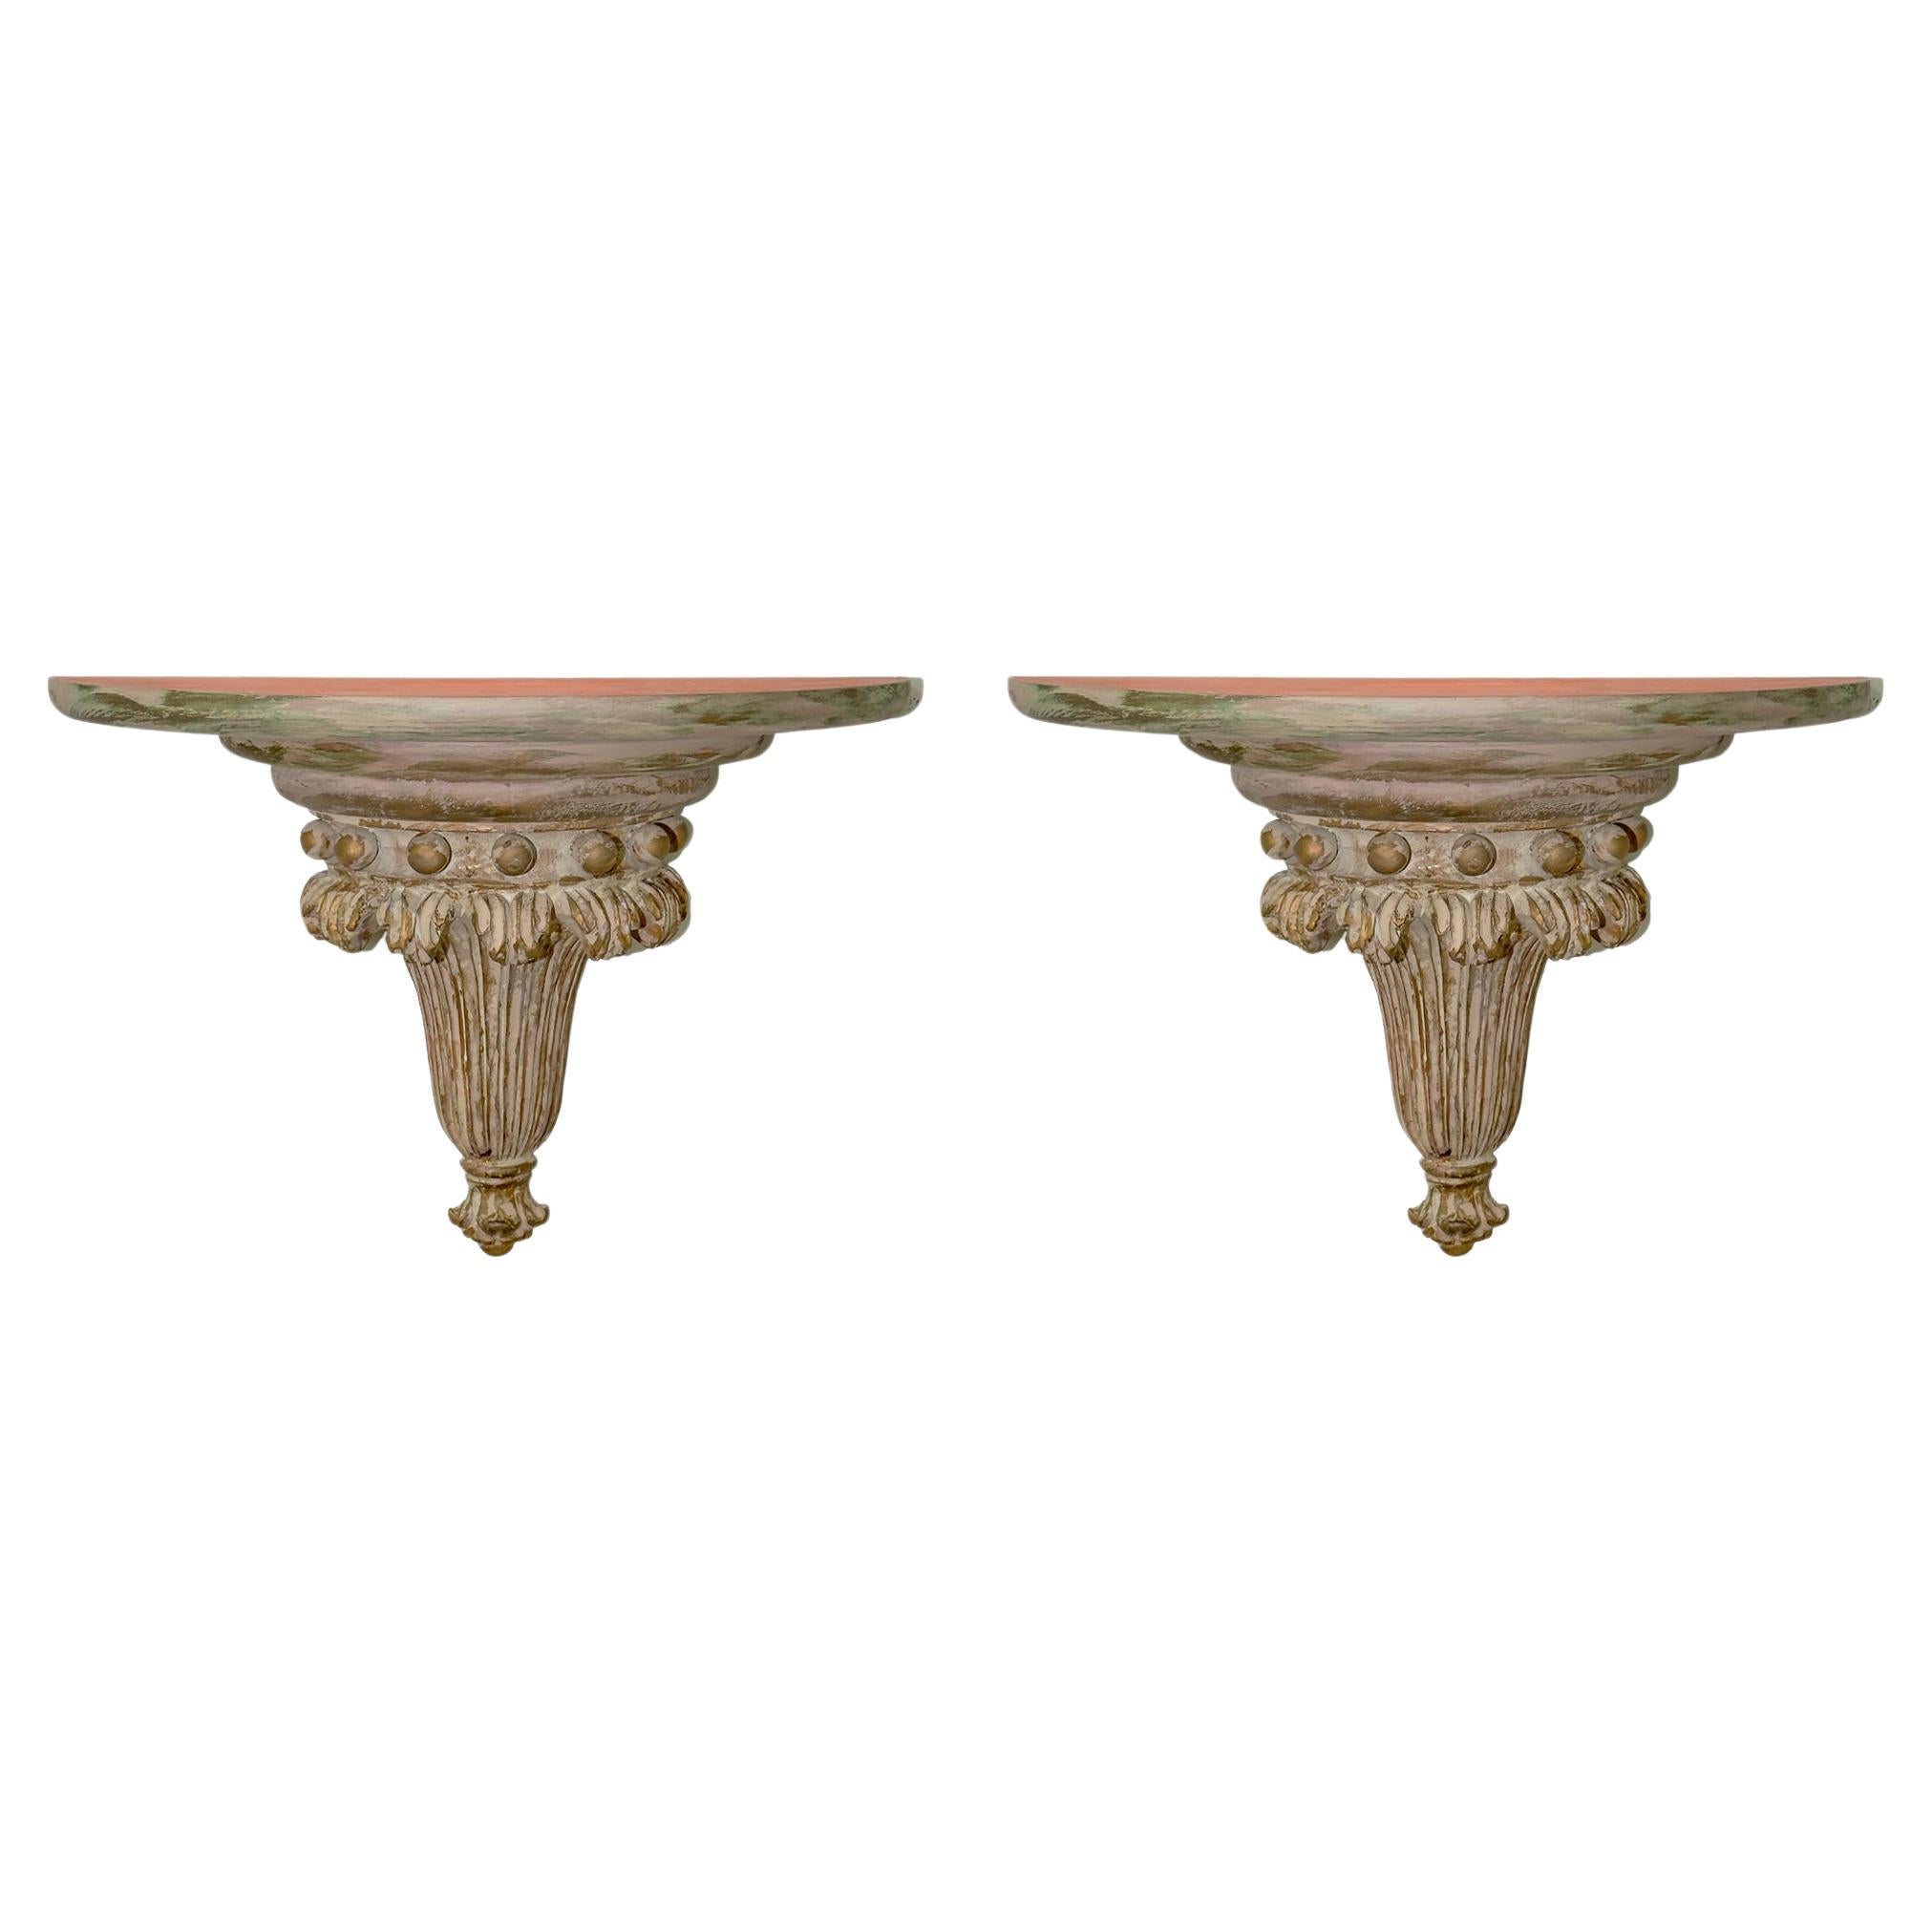 Italian Neoclassical Style Wood Carved Shell Form Wall Shelf or Bracket, a Pair For Sale